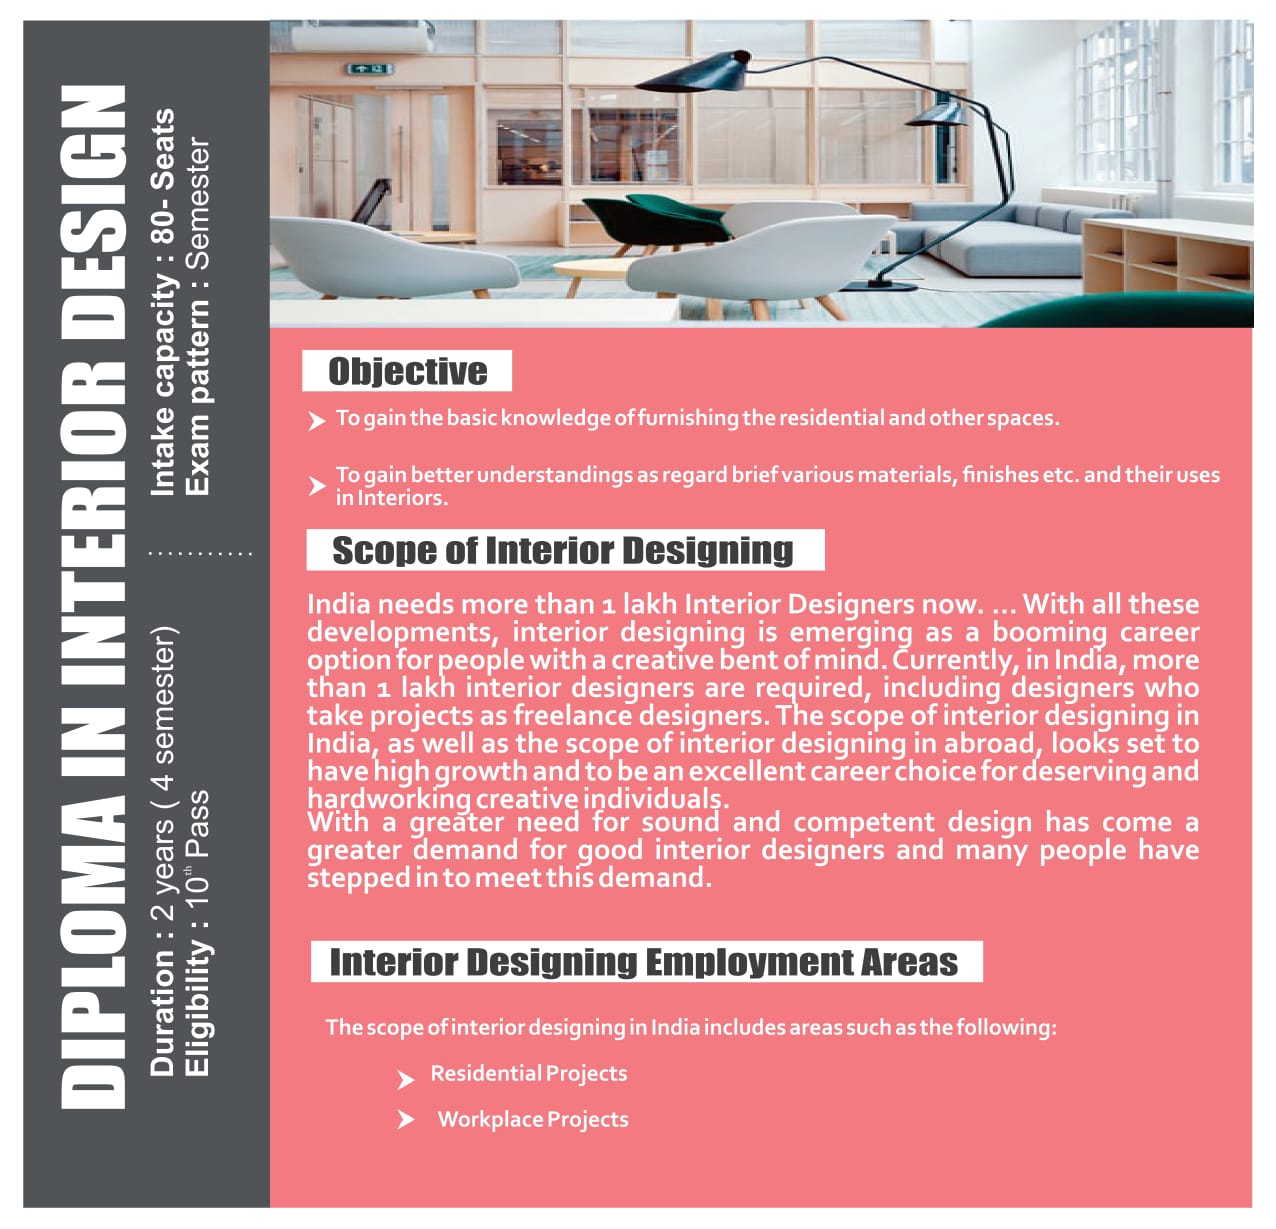 Diploma in Interior Design - Indian Institute of Food Technology